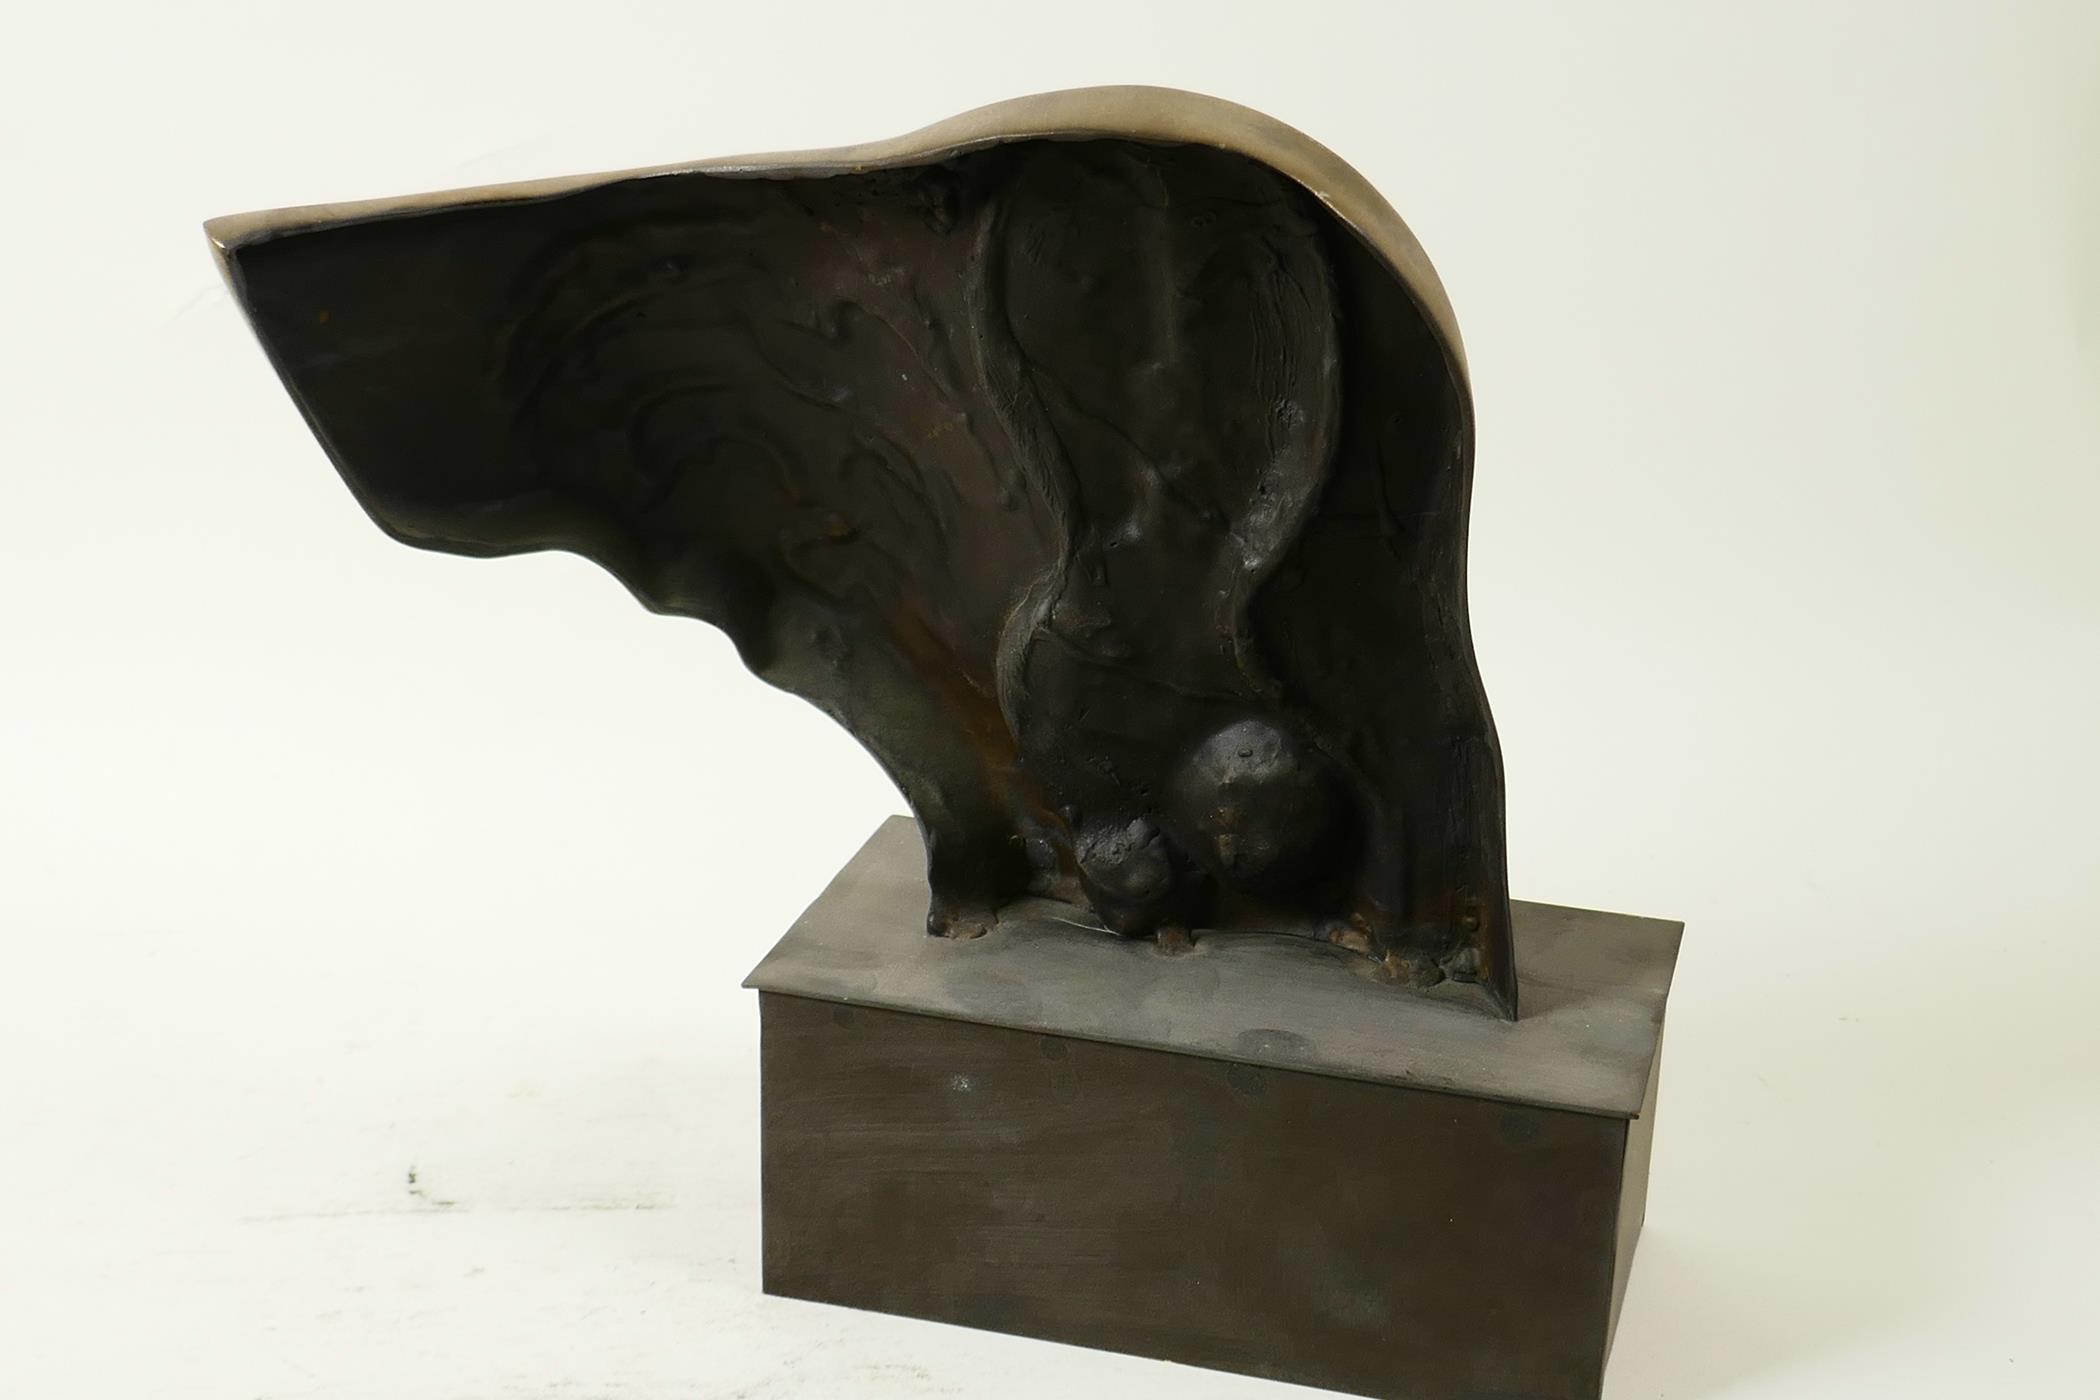 A modernist pressed bronze sculpture in the style of Picasso on a rectangular plinth, 9" high - Image 3 of 4